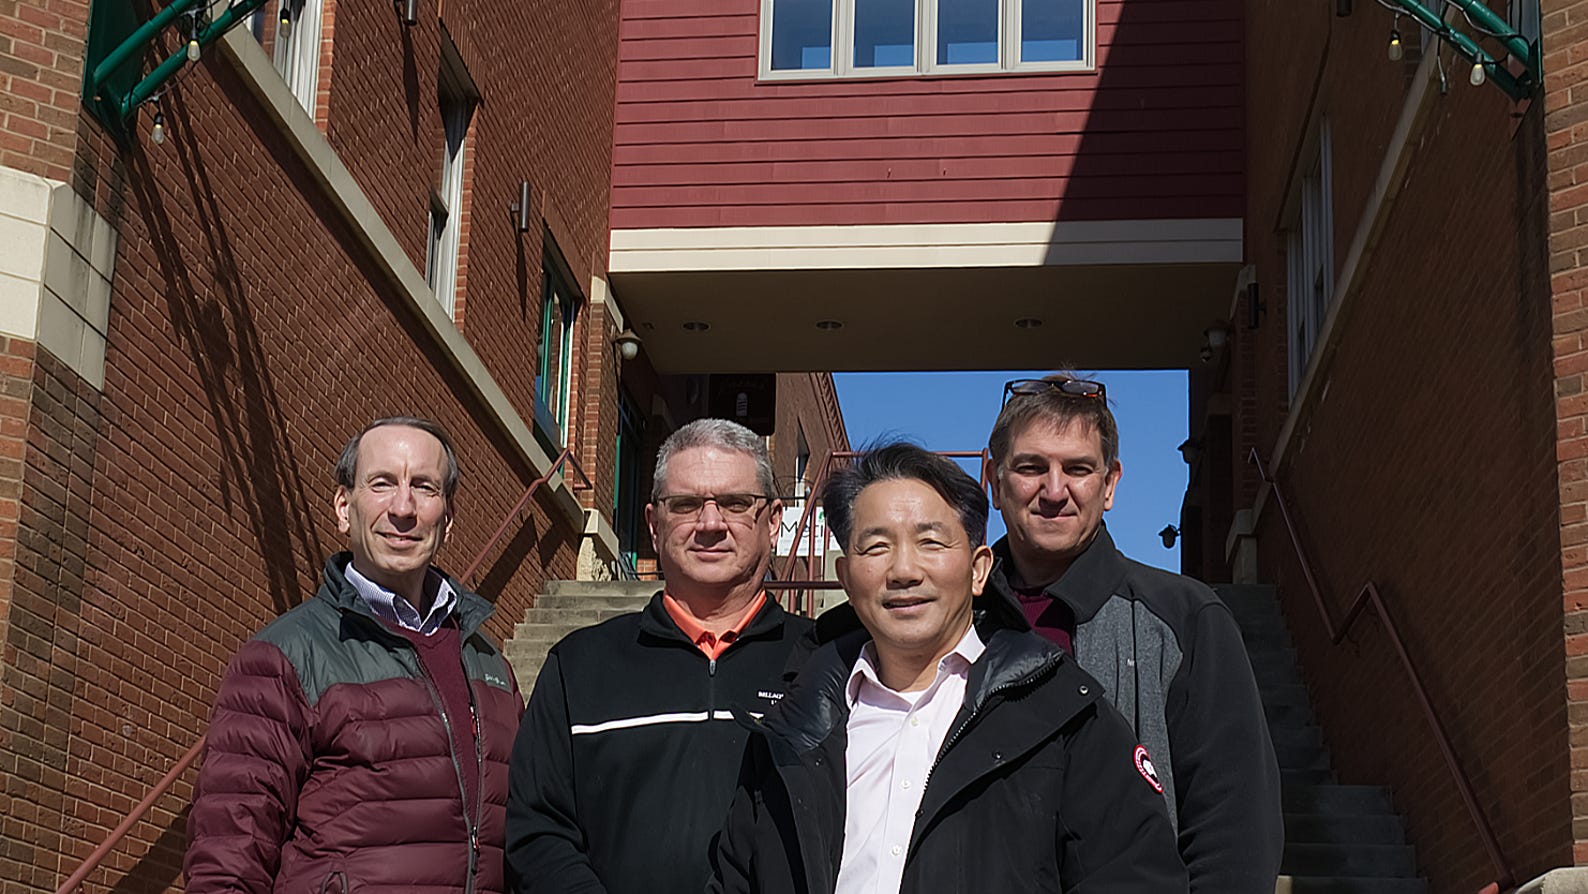 Jason Liu, Owner of Acorn Alley, front along with Kent Economic Director Tom Wilke, Jim Antal, Property Manager & Mike Tarpoff of Muirfield Realty Group